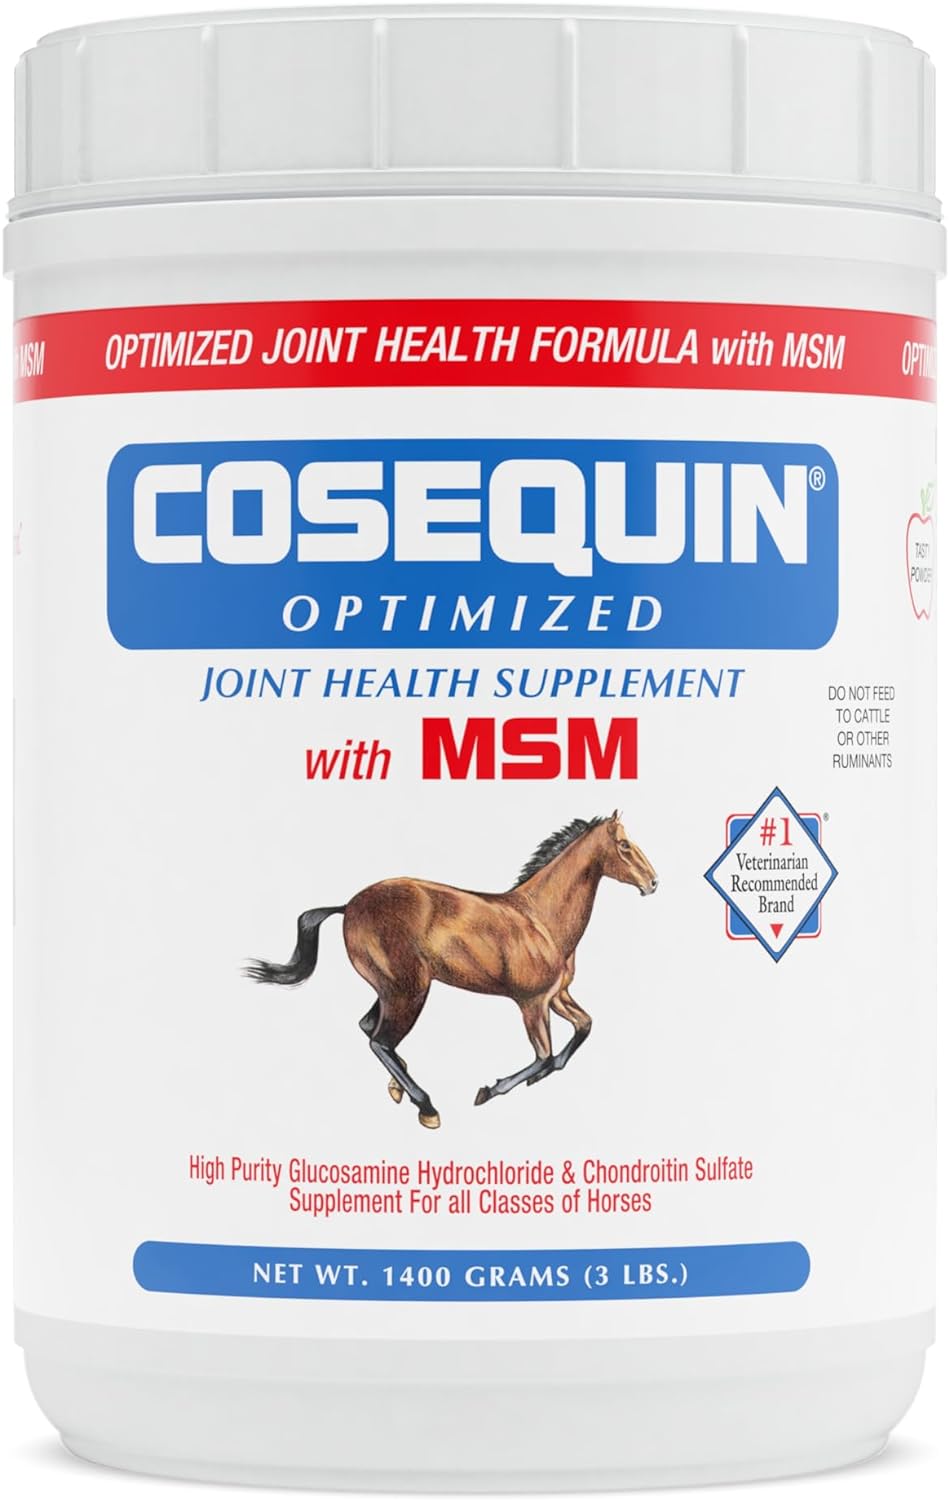 Nutramax Cosequin Optimized with MSM Joint Health Supplement for Horses - Powder with Glucosamine an